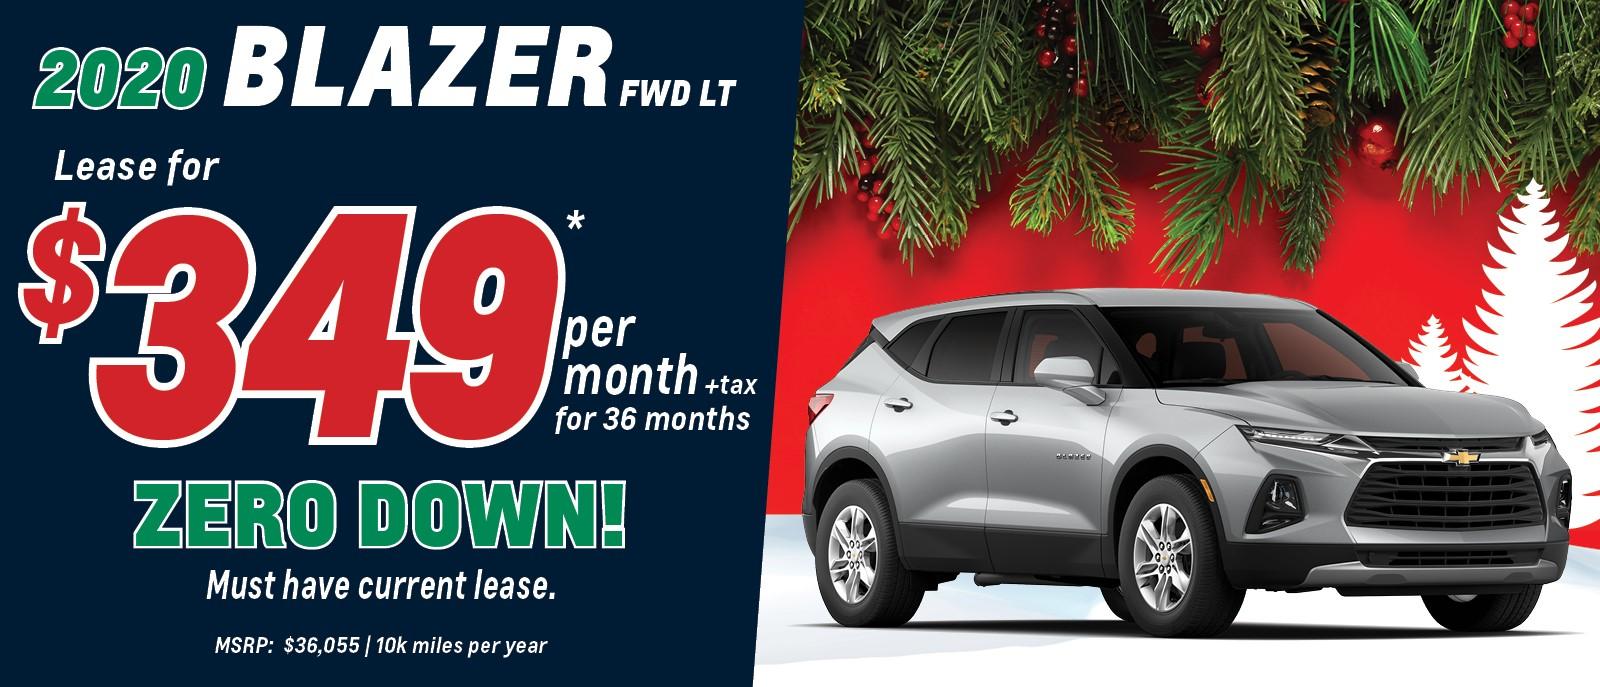 LEASE THE 2020 BLAZER FOR ONLY $349 PER MONTH!